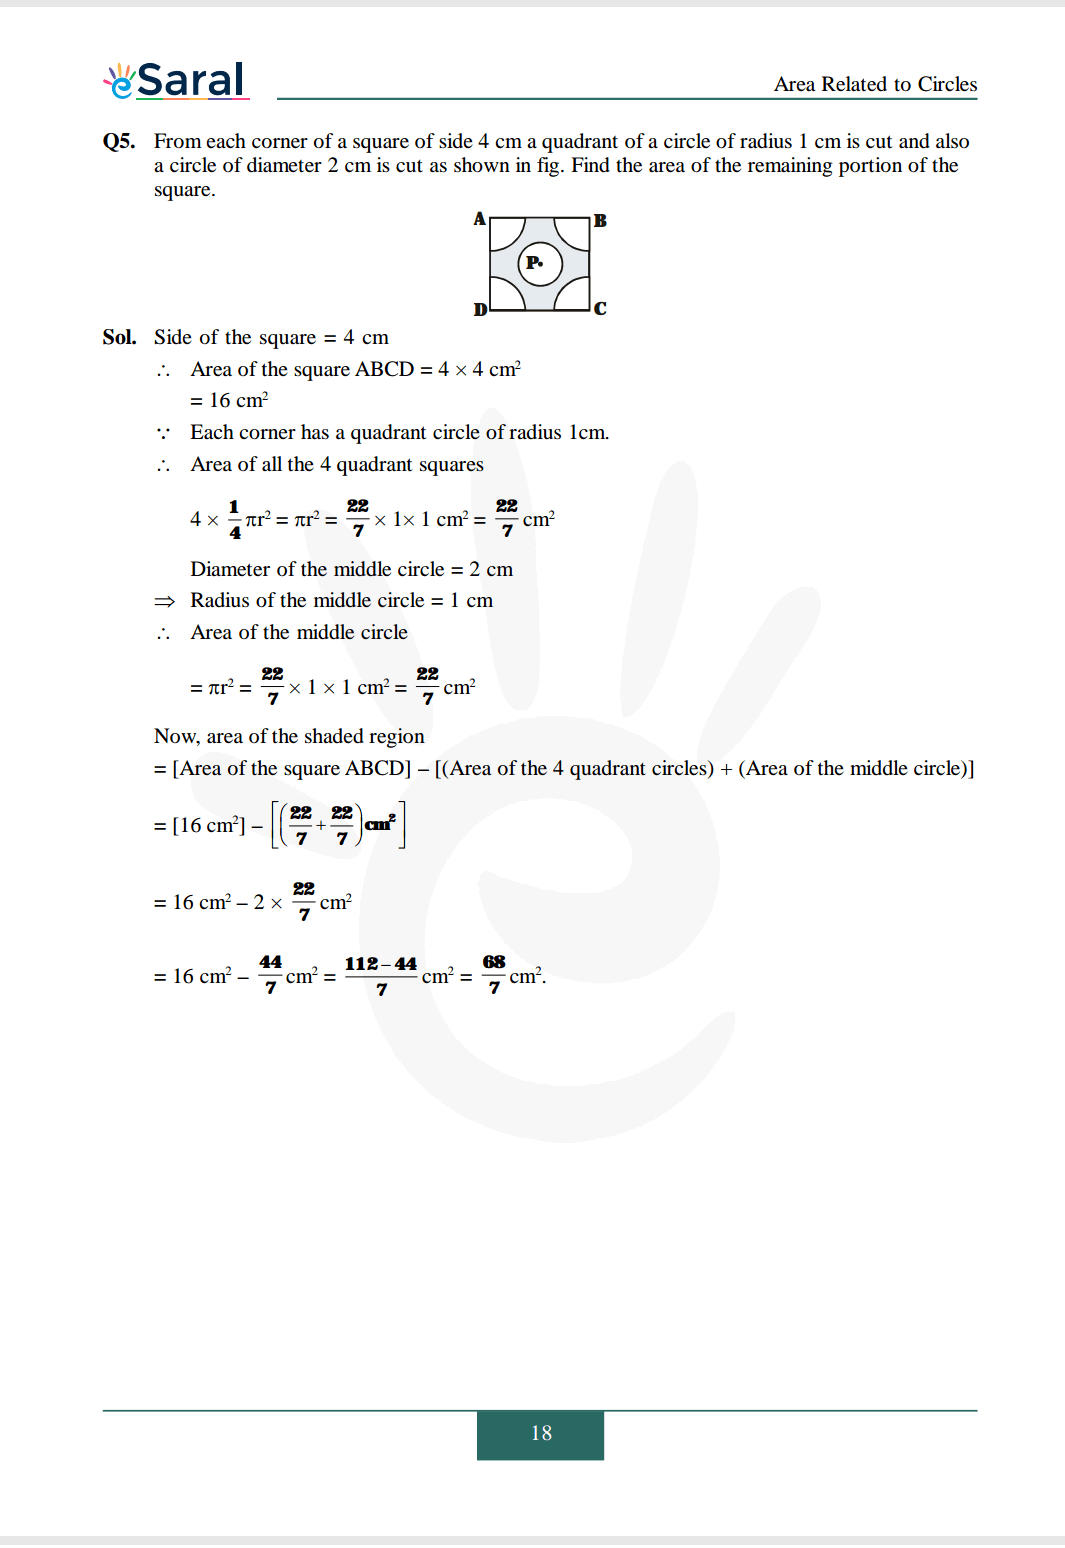 Chapter 12 exercise 12.3 solutions Image 4